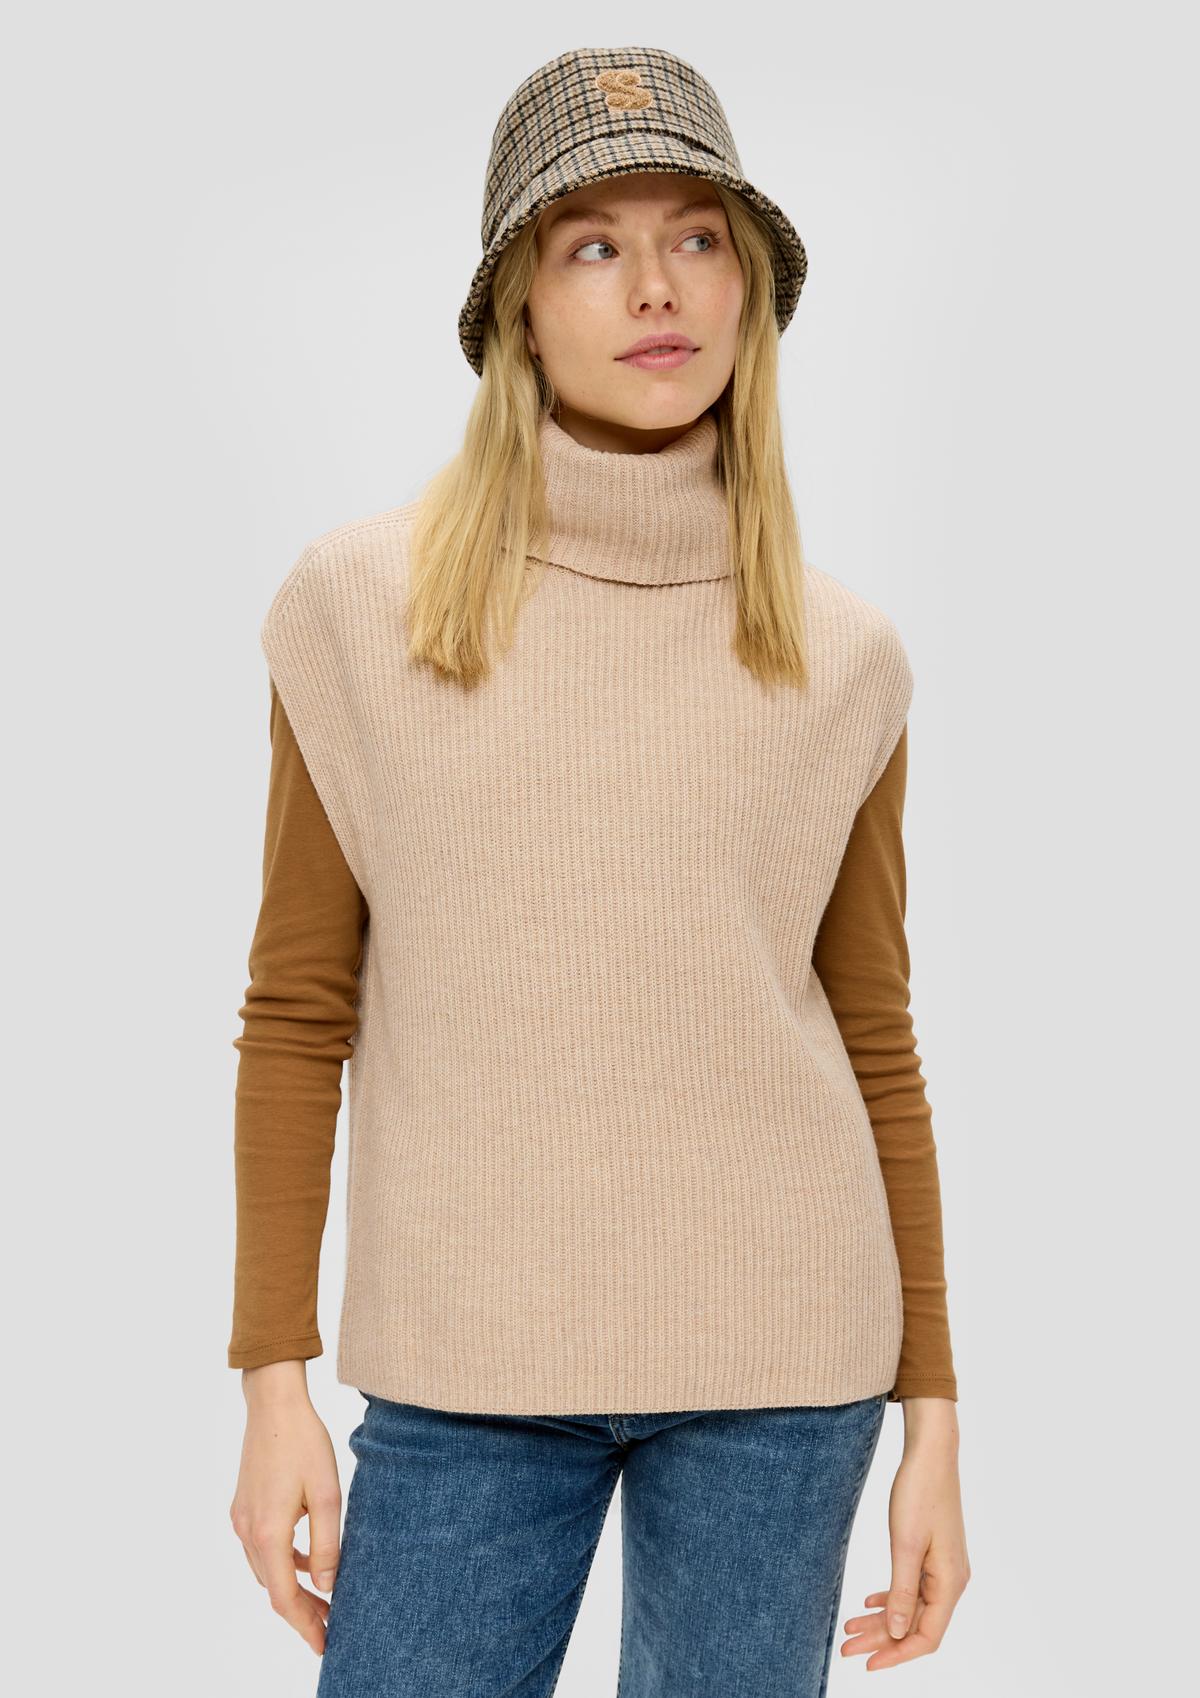 Sleeveless knitted jumper in a wool blend